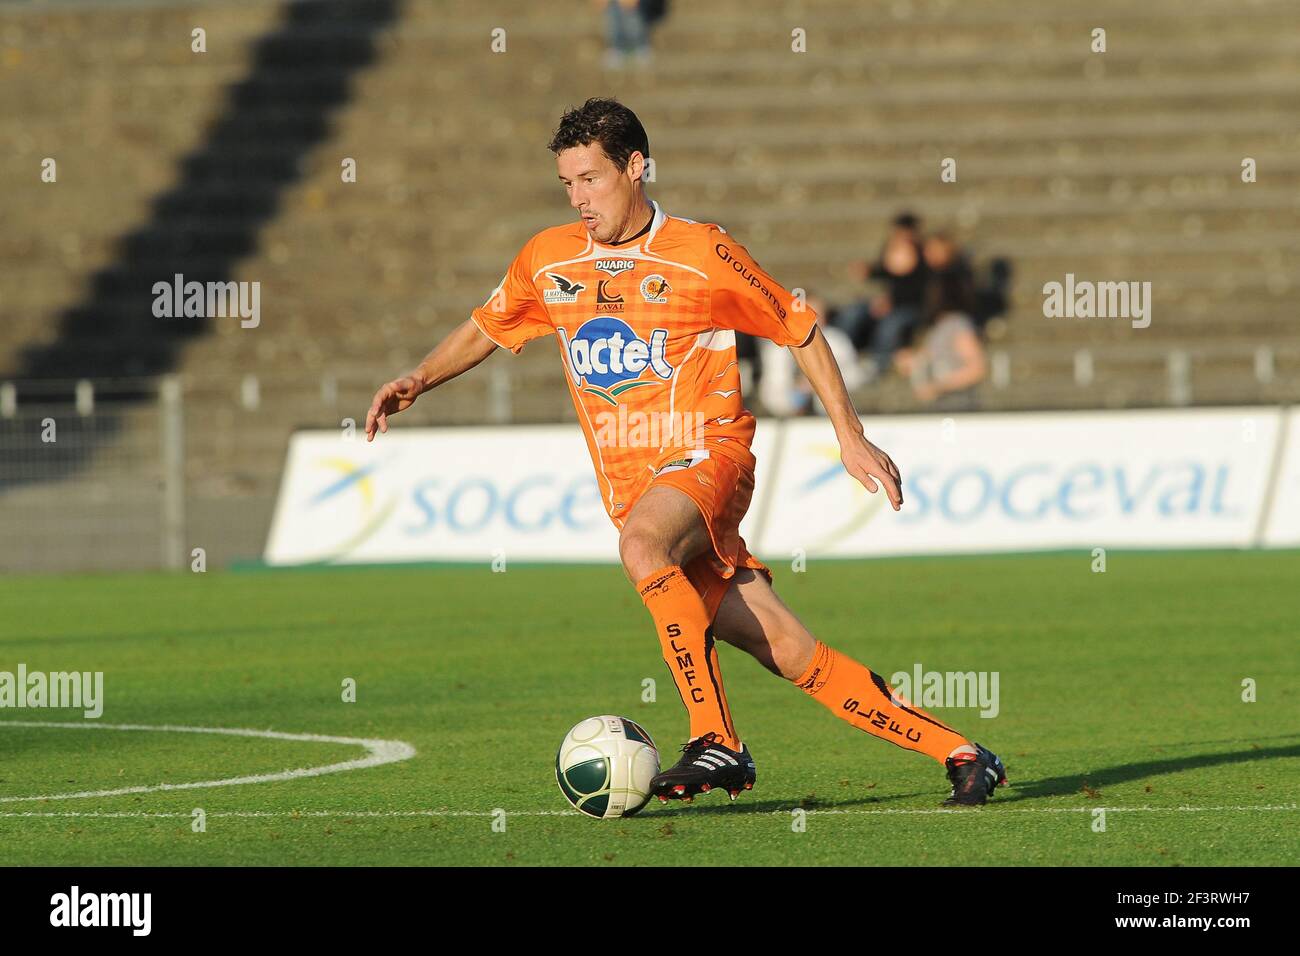 FOOTBALL - FRENCH CHAMPIONSHIP 2011/2012 - L2 - STADE LAVALLOIS v US BOULOGNE CO - 12/08/2011 - PHOTO PASCAL ALLEE / DPPI - PIERRE TALMONT (LAV) Stock Photo